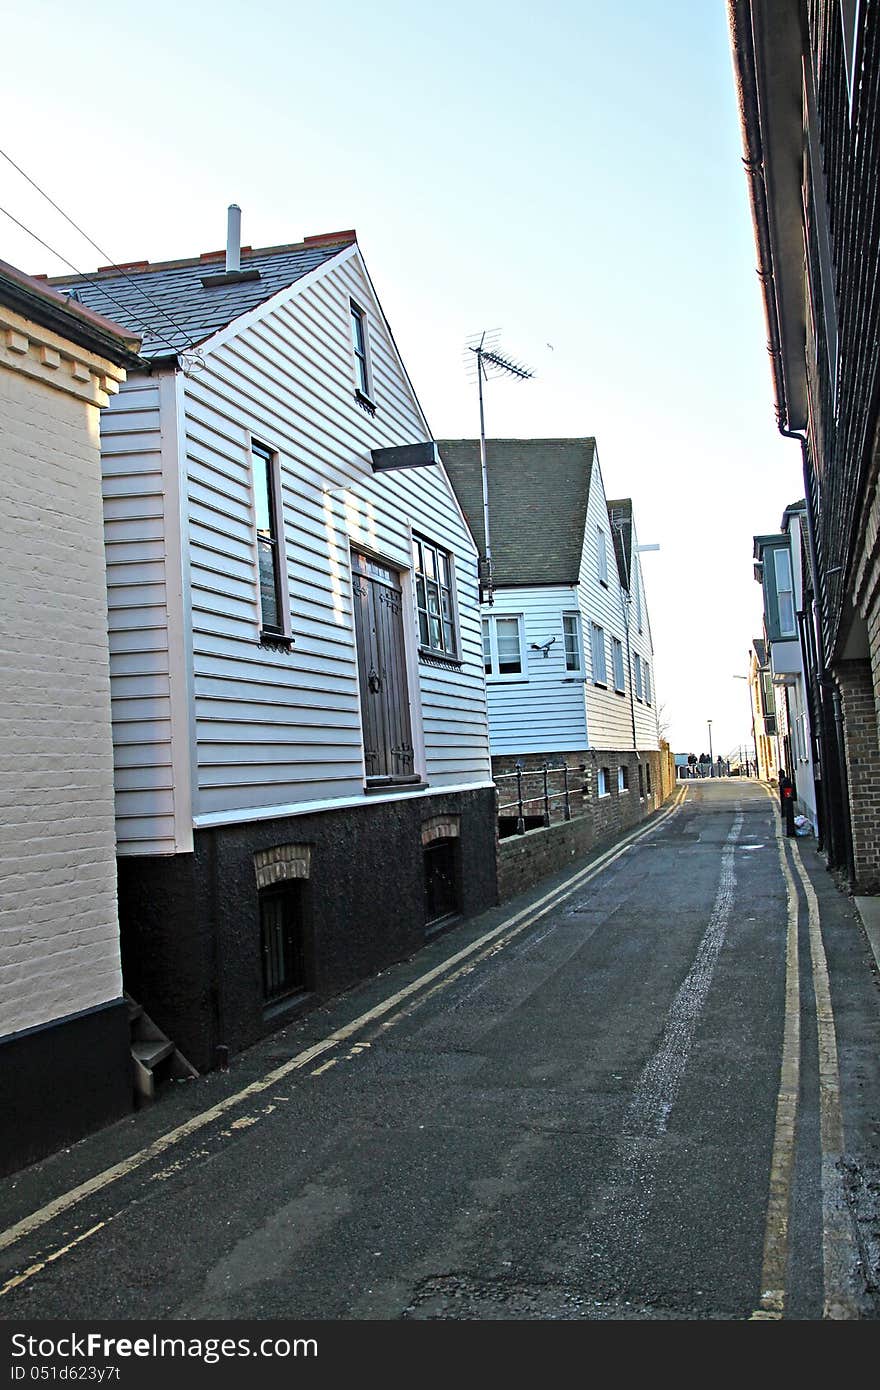 Photo showing narrow lane running between old fishermans huts and cottages in the historic harbour fishing town of whitstable in kent. Photo showing narrow lane running between old fishermans huts and cottages in the historic harbour fishing town of whitstable in kent.